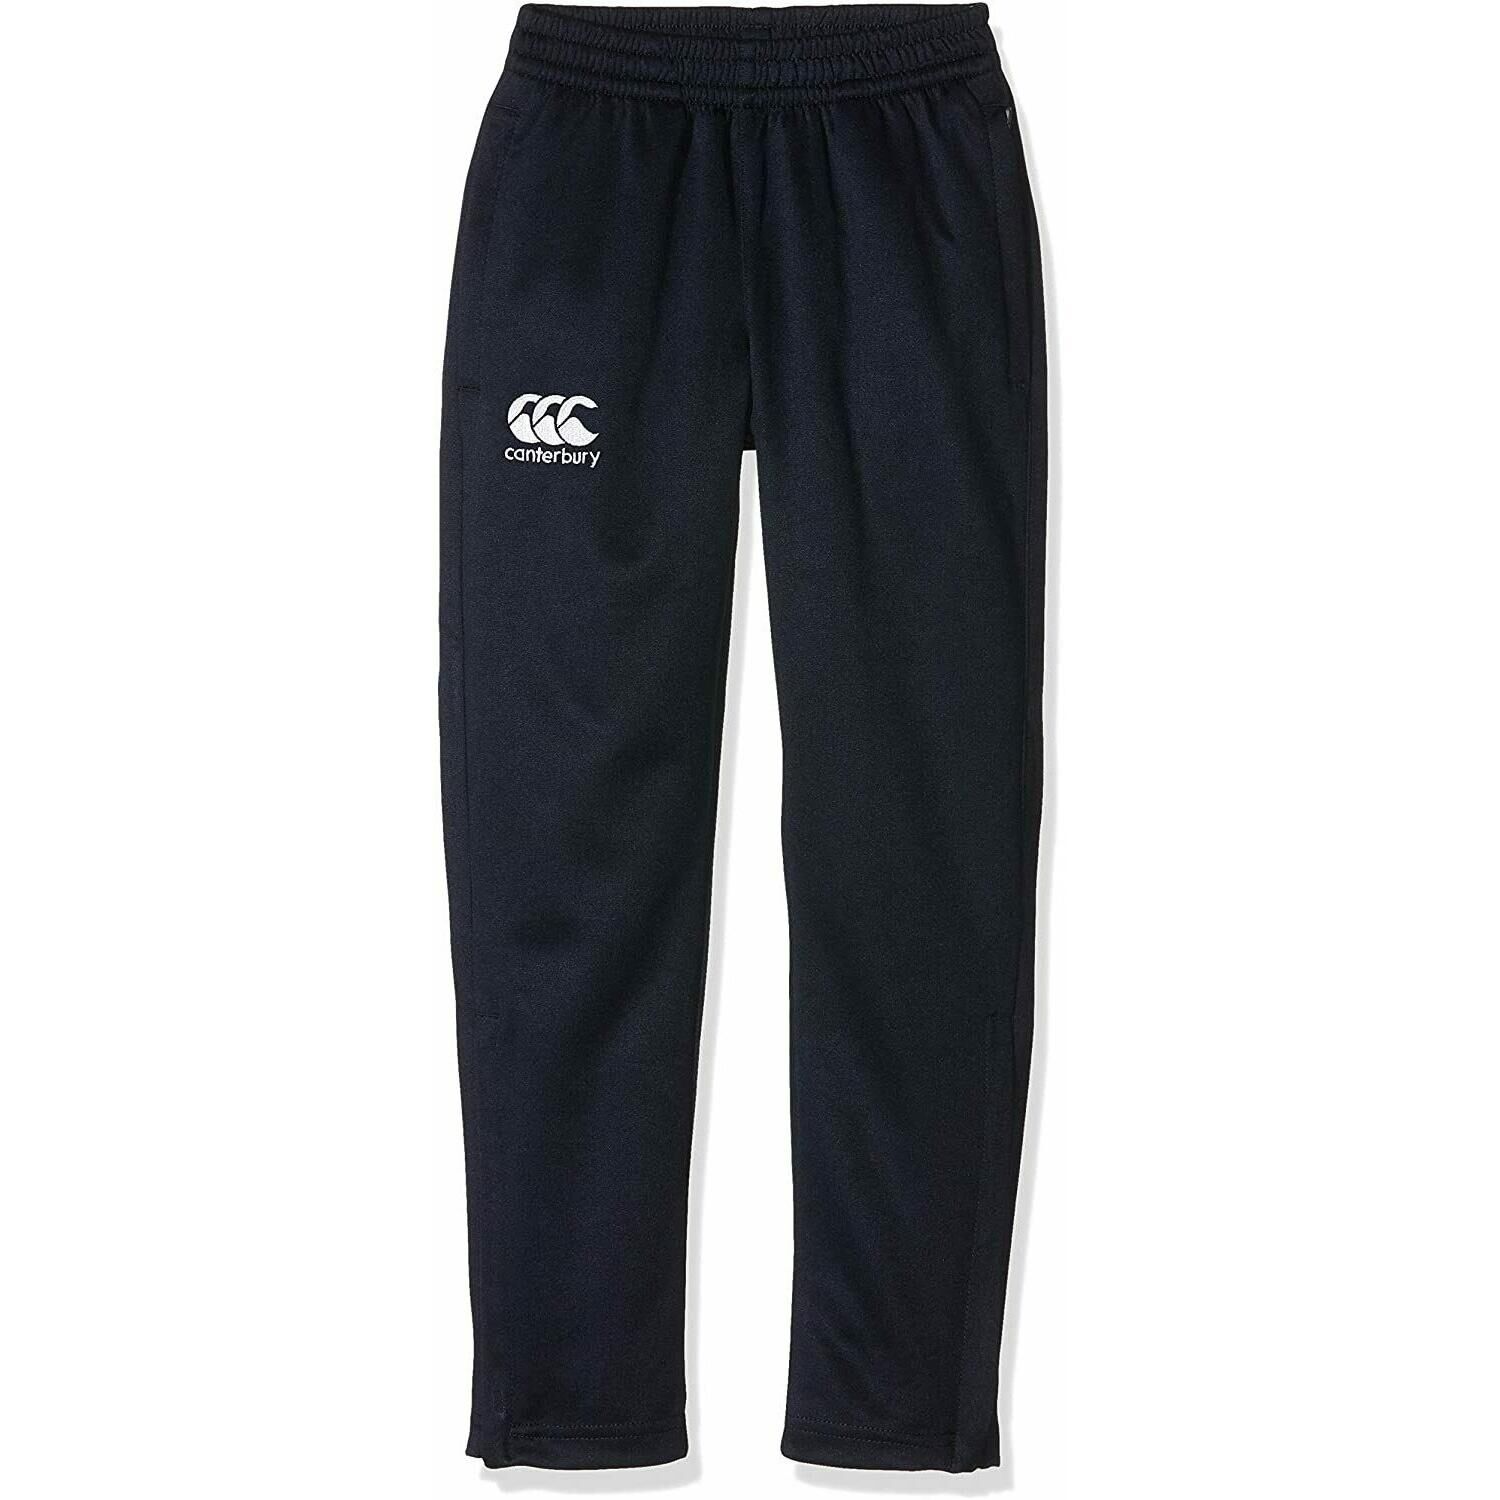 CANTERBURY Childrens/Kids Tapered Stretch Jogging Bottoms (Navy)